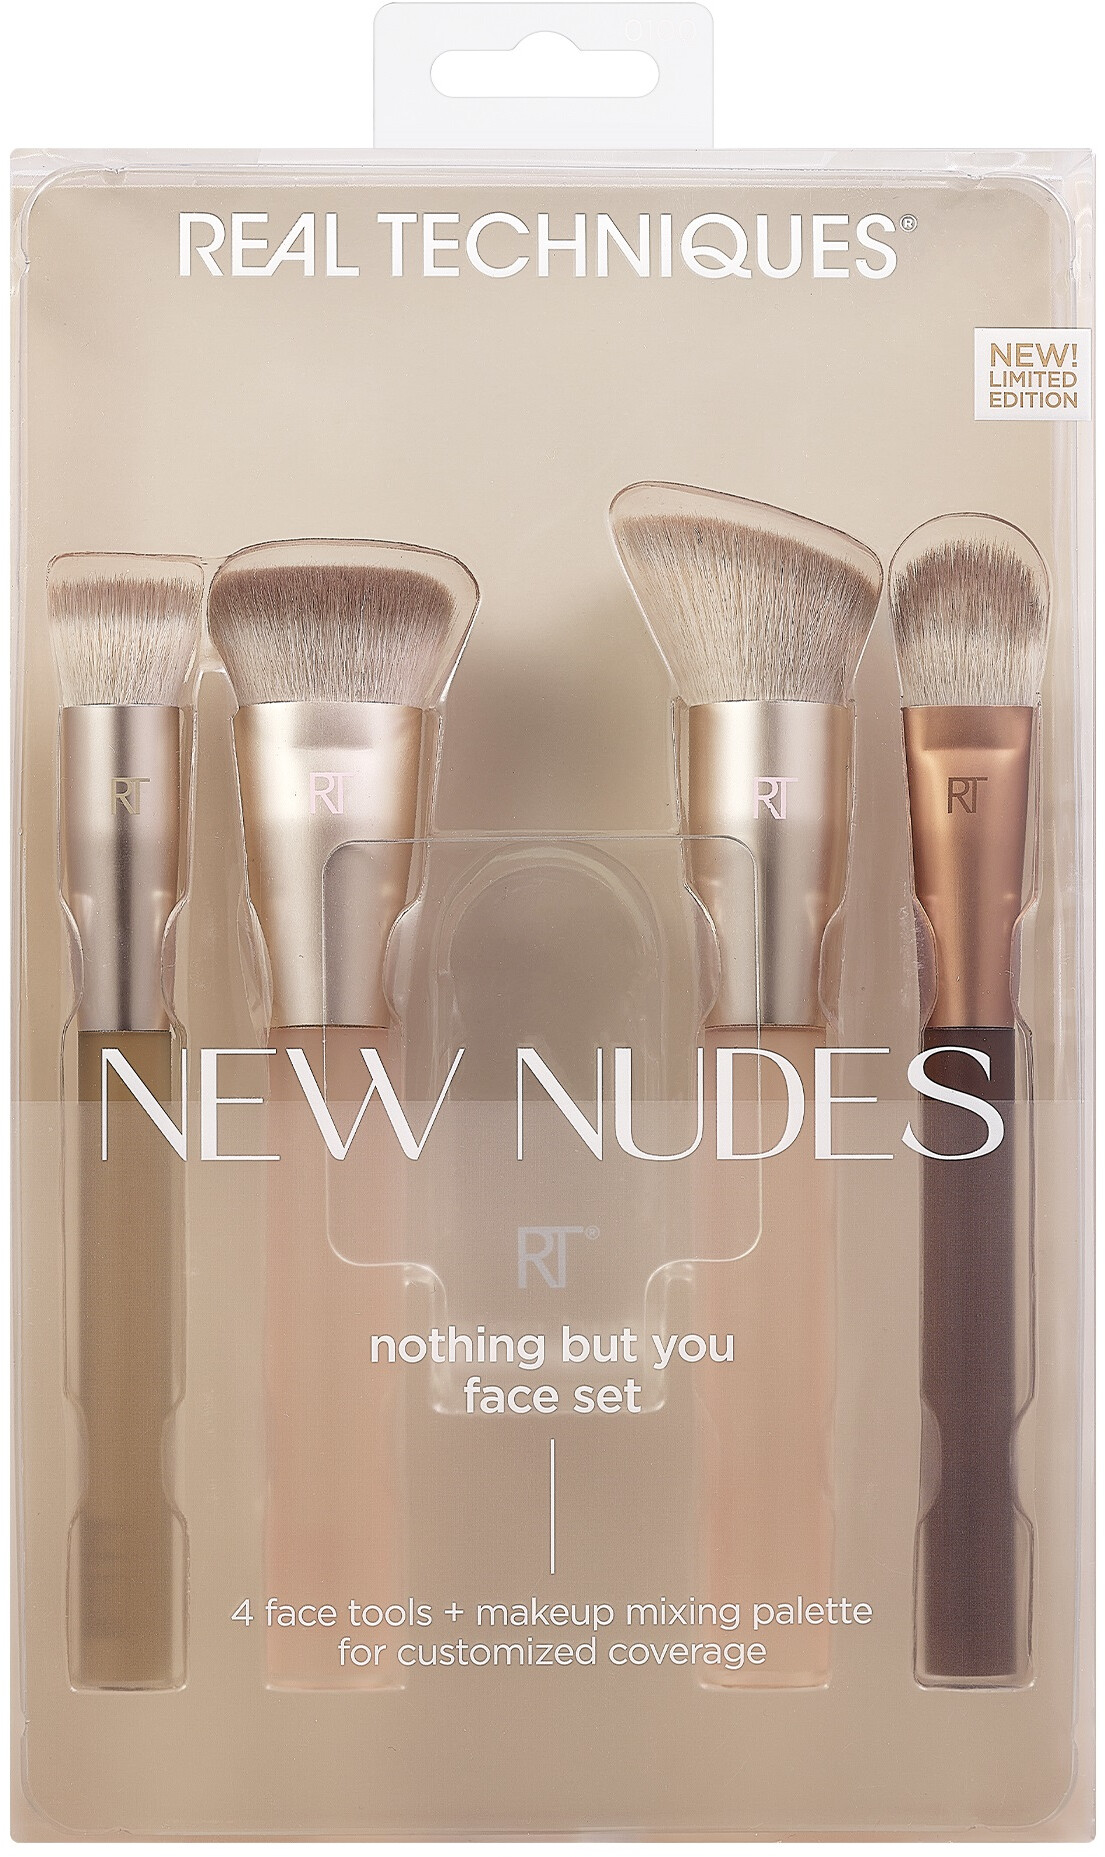 Real Techniques New Nudes Nothing But You Face Gift Set